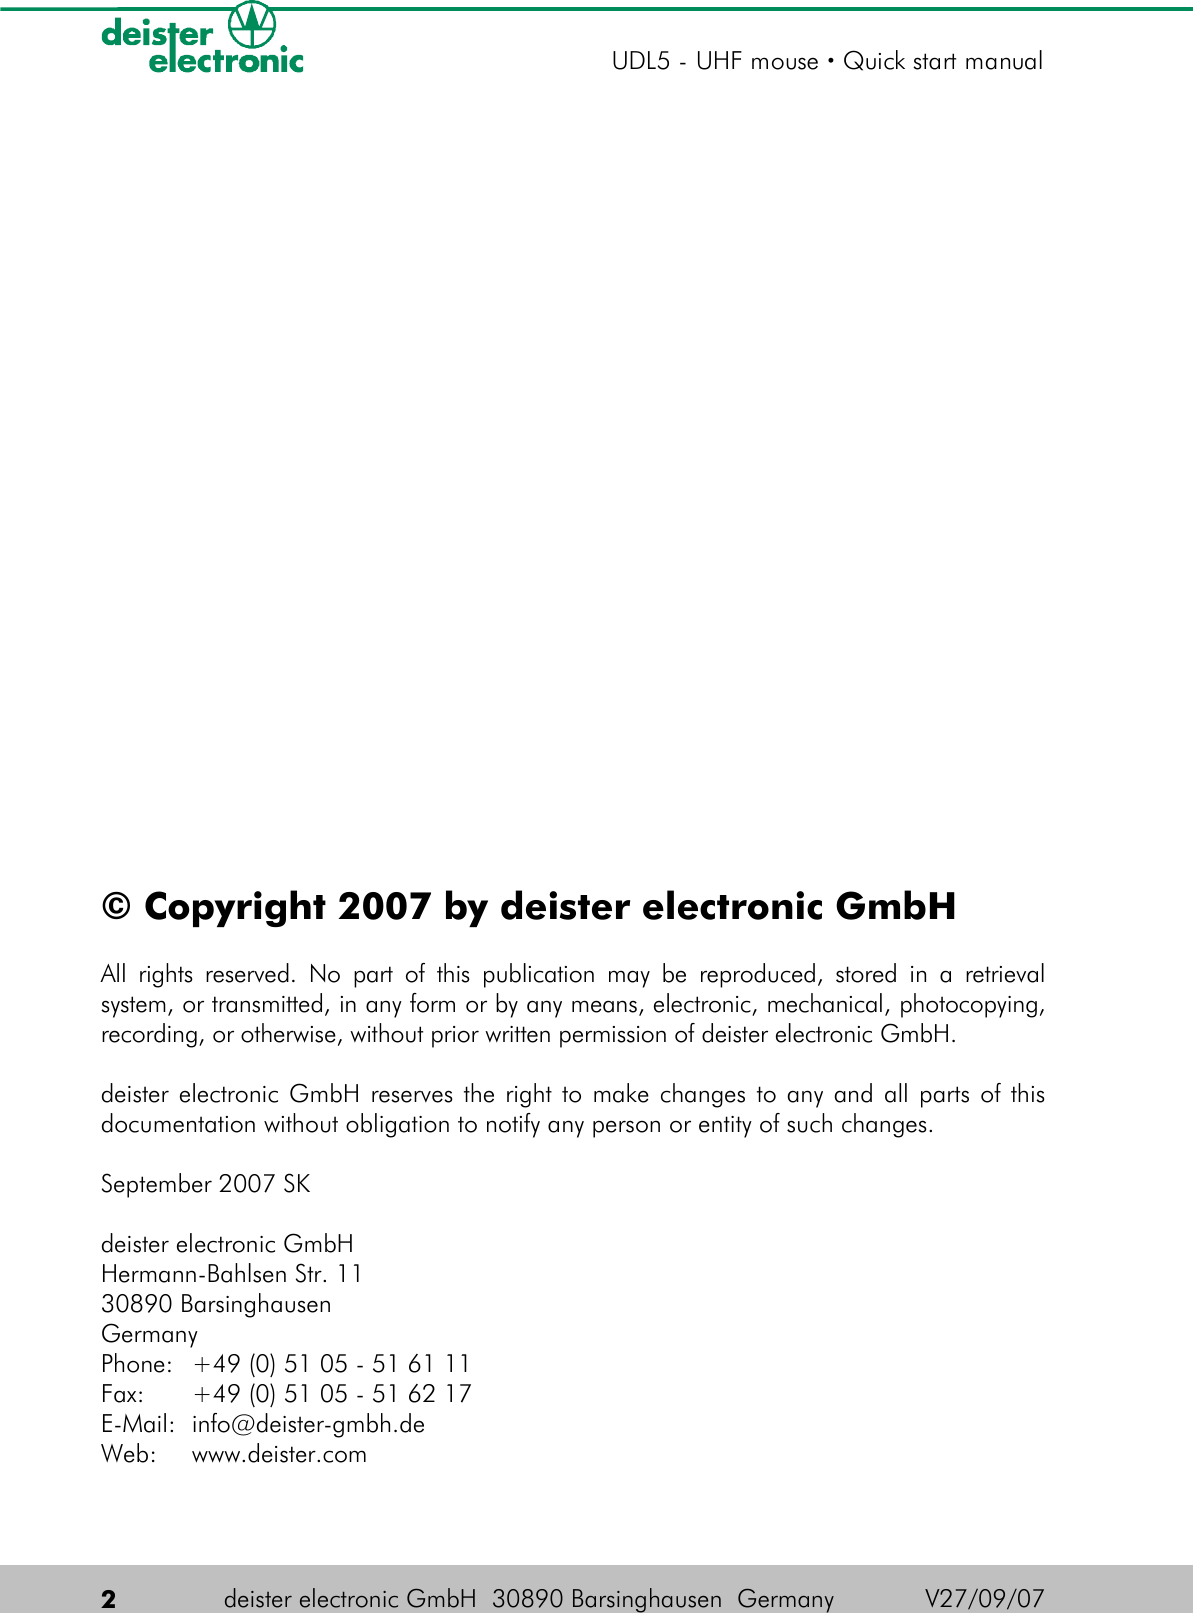 © Copyright 2007 by deister electronic GmbHAll rights reserved. No part of this publication may be reproduced, stored in a retrieval system, or transmitted, in any form or by any means, electronic, mechanical, photocopying, recording, or otherwise, without prior written permission of deister electronic GmbH.deister electronic GmbH reserves the right to make changes to any and all parts of this documentation without obligation to notify any person or entity of such changes.September 2007 SKdeister electronic GmbHHermann-Bahlsen Str. 11 30890 BarsinghausenGermanyPhone: +49 (0) 51 05 - 51 61 11Fax: +49 (0) 51 05 - 51 62 17E-Mail: info@deister-gmbh.deWeb: www.deister.com 2deister electronic GmbH  30890 Barsinghausen  Germany  V27/09/07UDL5 - UHF mouse · Quick start manual